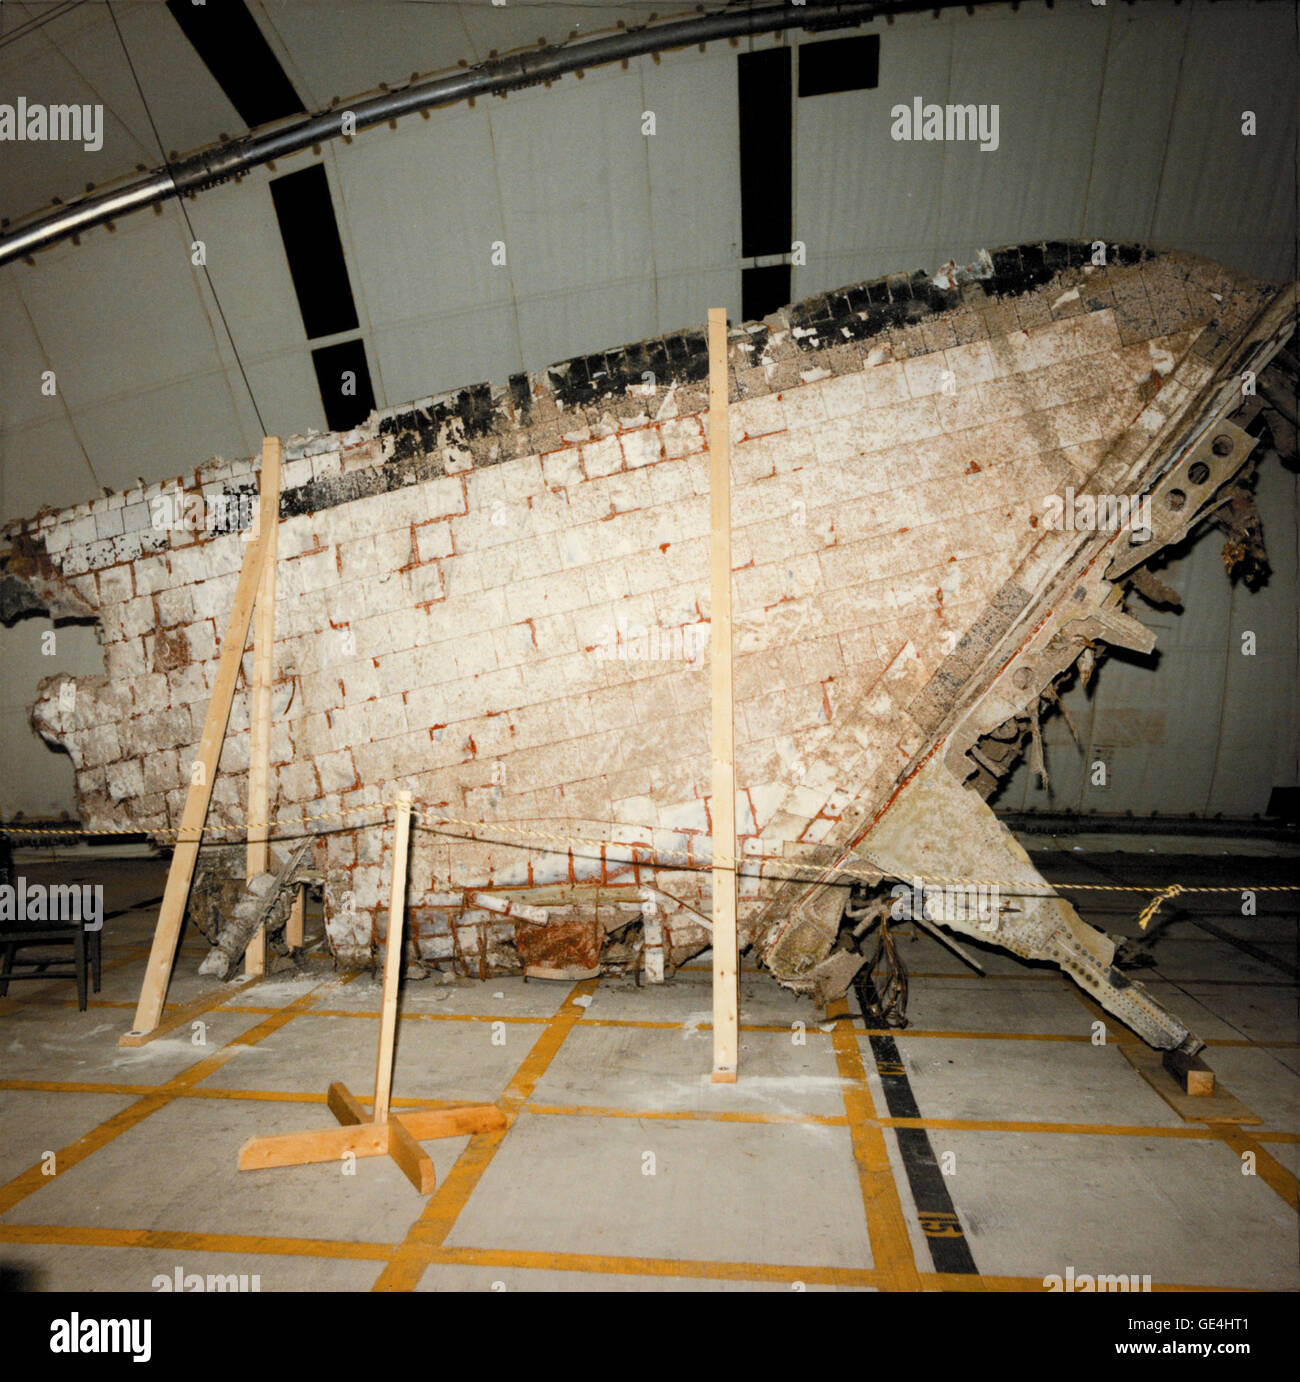 (April 15, 1986) On January 28, 1986, the Space Shuttle Challenger and her seven-member crew were lost when a ruptured O-ring in the right Solid Rocket Booster caused an explosion soon after launch. Among other debris found in the ocean, search and recovery teams located this piece of the right vertical stabilizer. Although the stabilizer's surface suffered some heat discoloration and burns, the inner aluminum structure showed no signs of having melted. Investigators found various pieces of material from other parts of the Shuttle embedded into the surface of the thermal protection tiles, as w Stock Photo